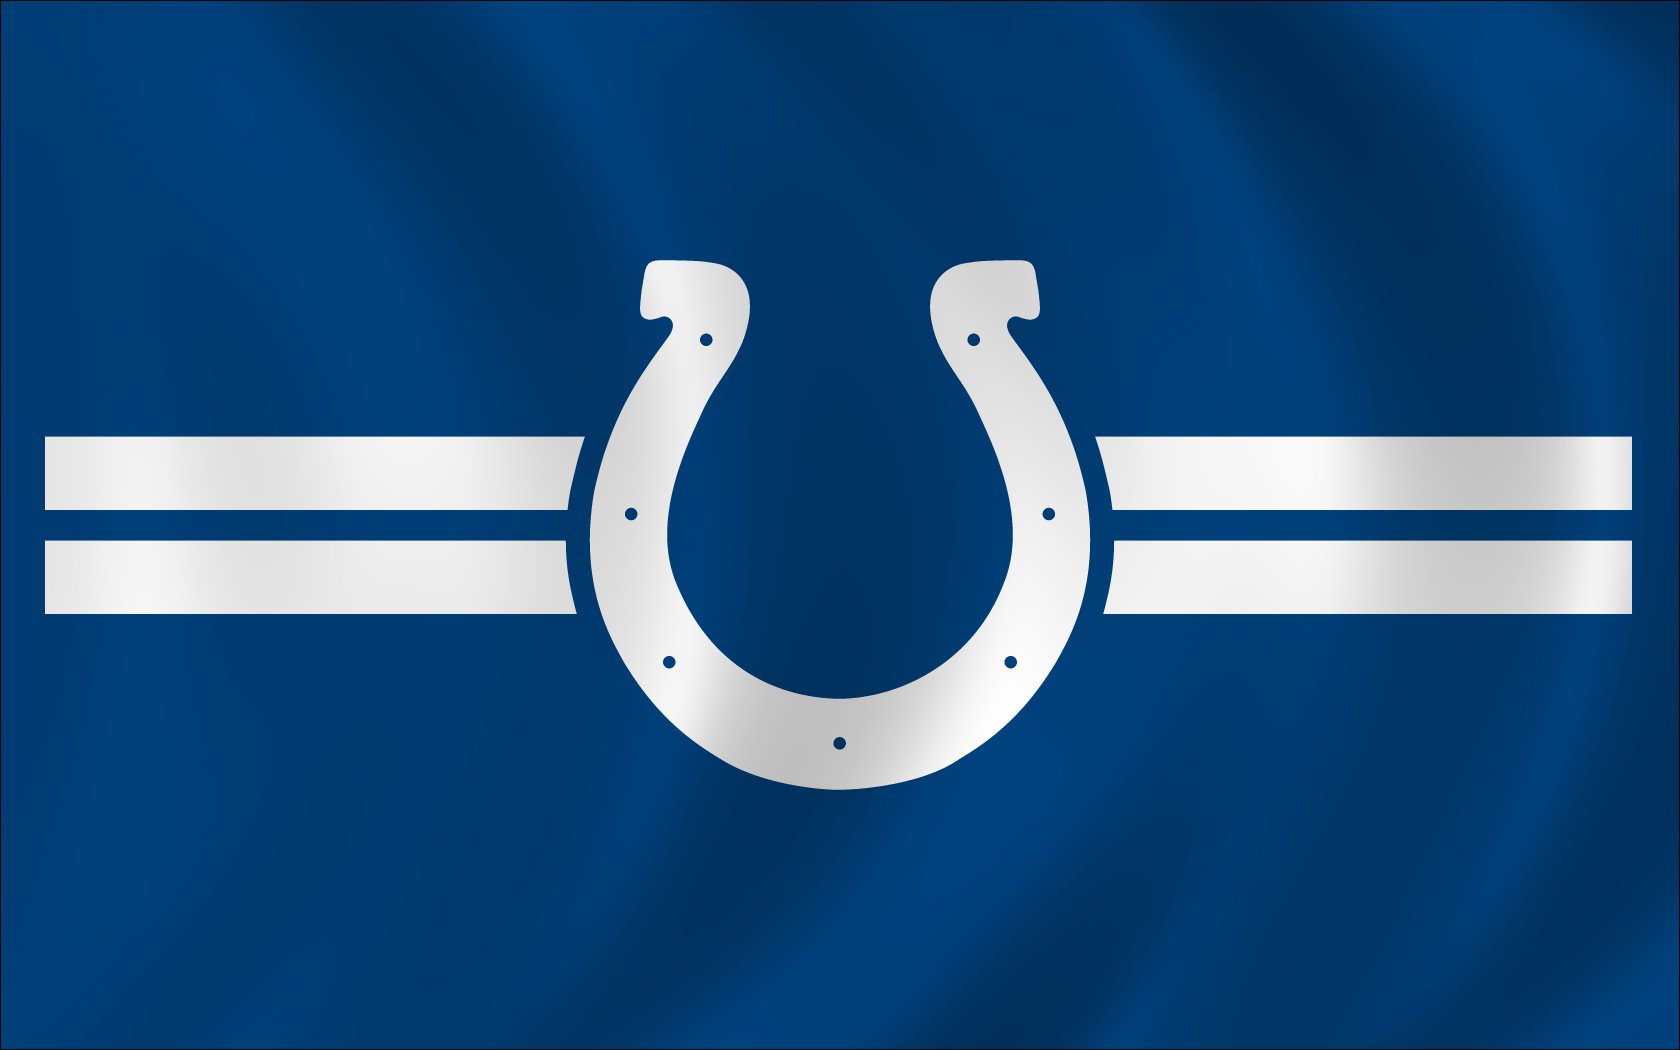 Indianapolis Wallpapers